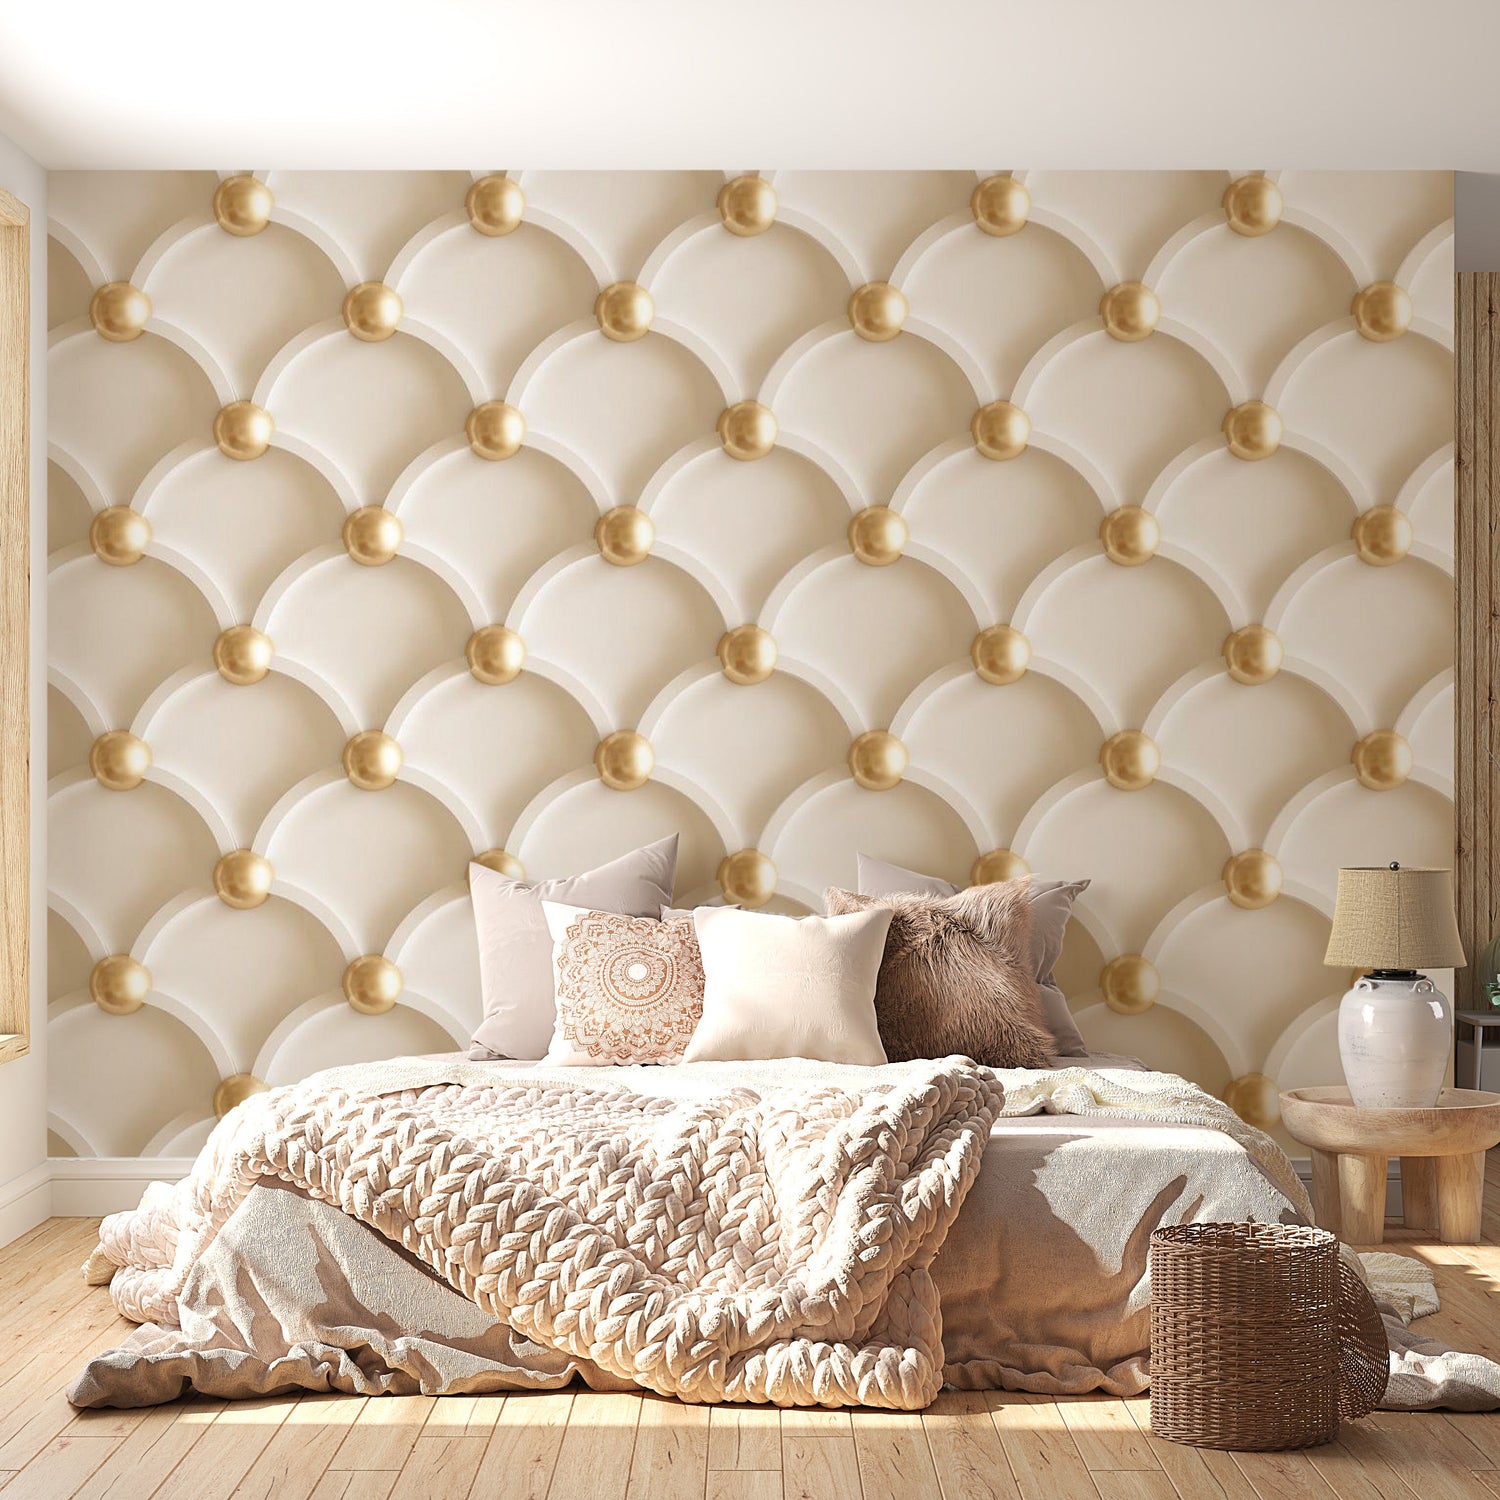 Peel & Stick Glam Wall Mural - Perfect Harmony - Removable Wall Decals